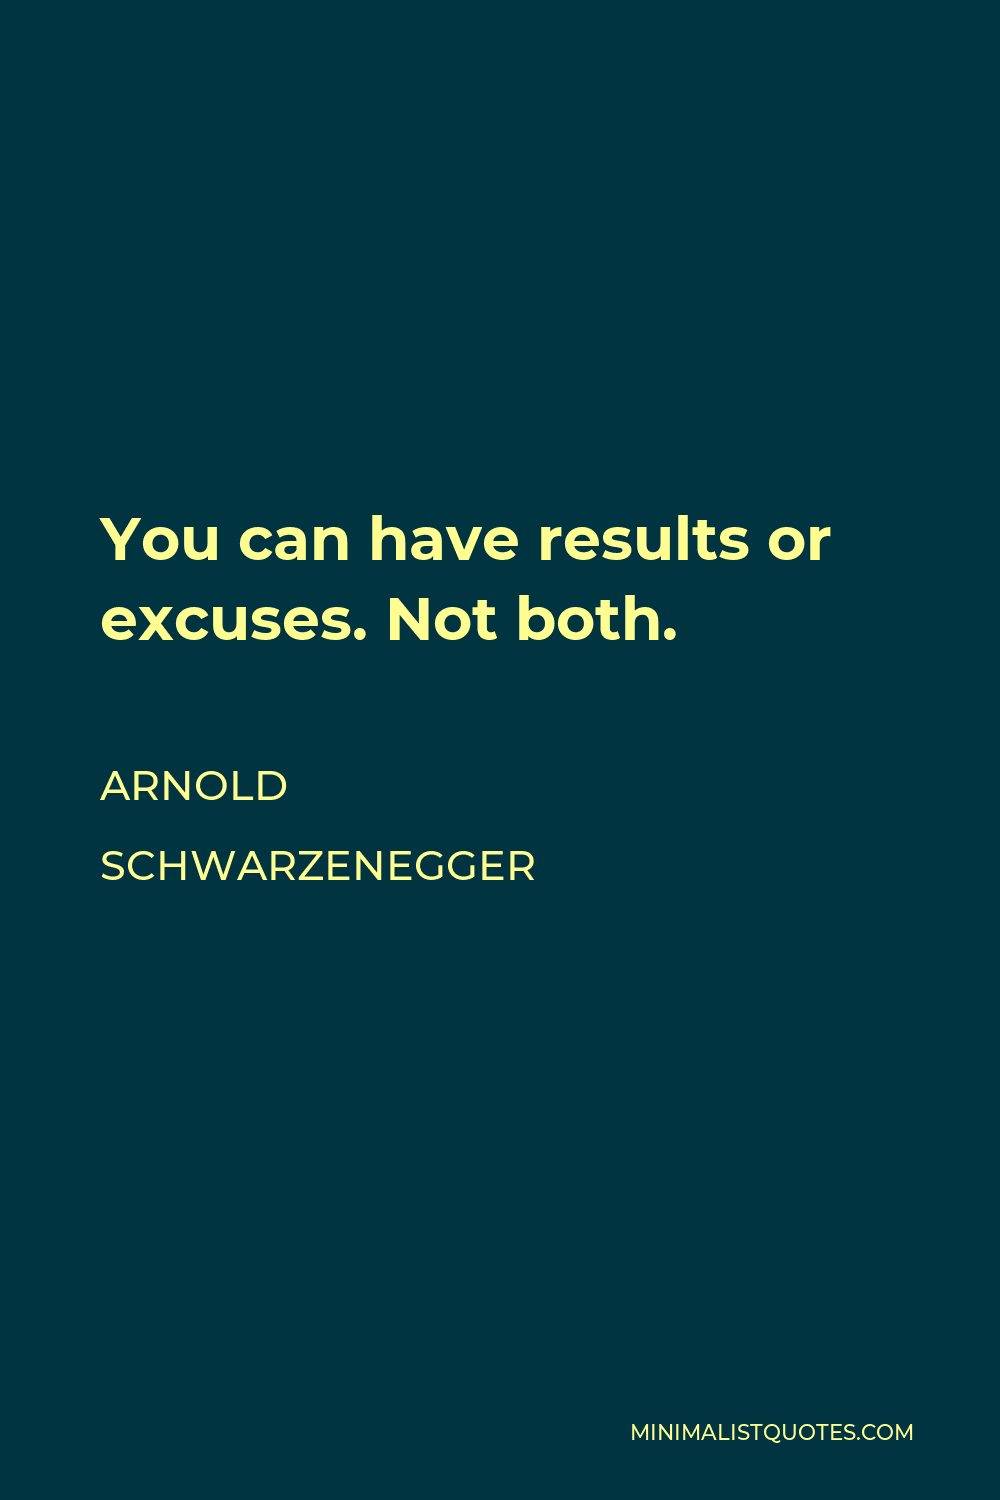 Arnold Schwarzenegger Quote - You can have results or excuses. Not both.